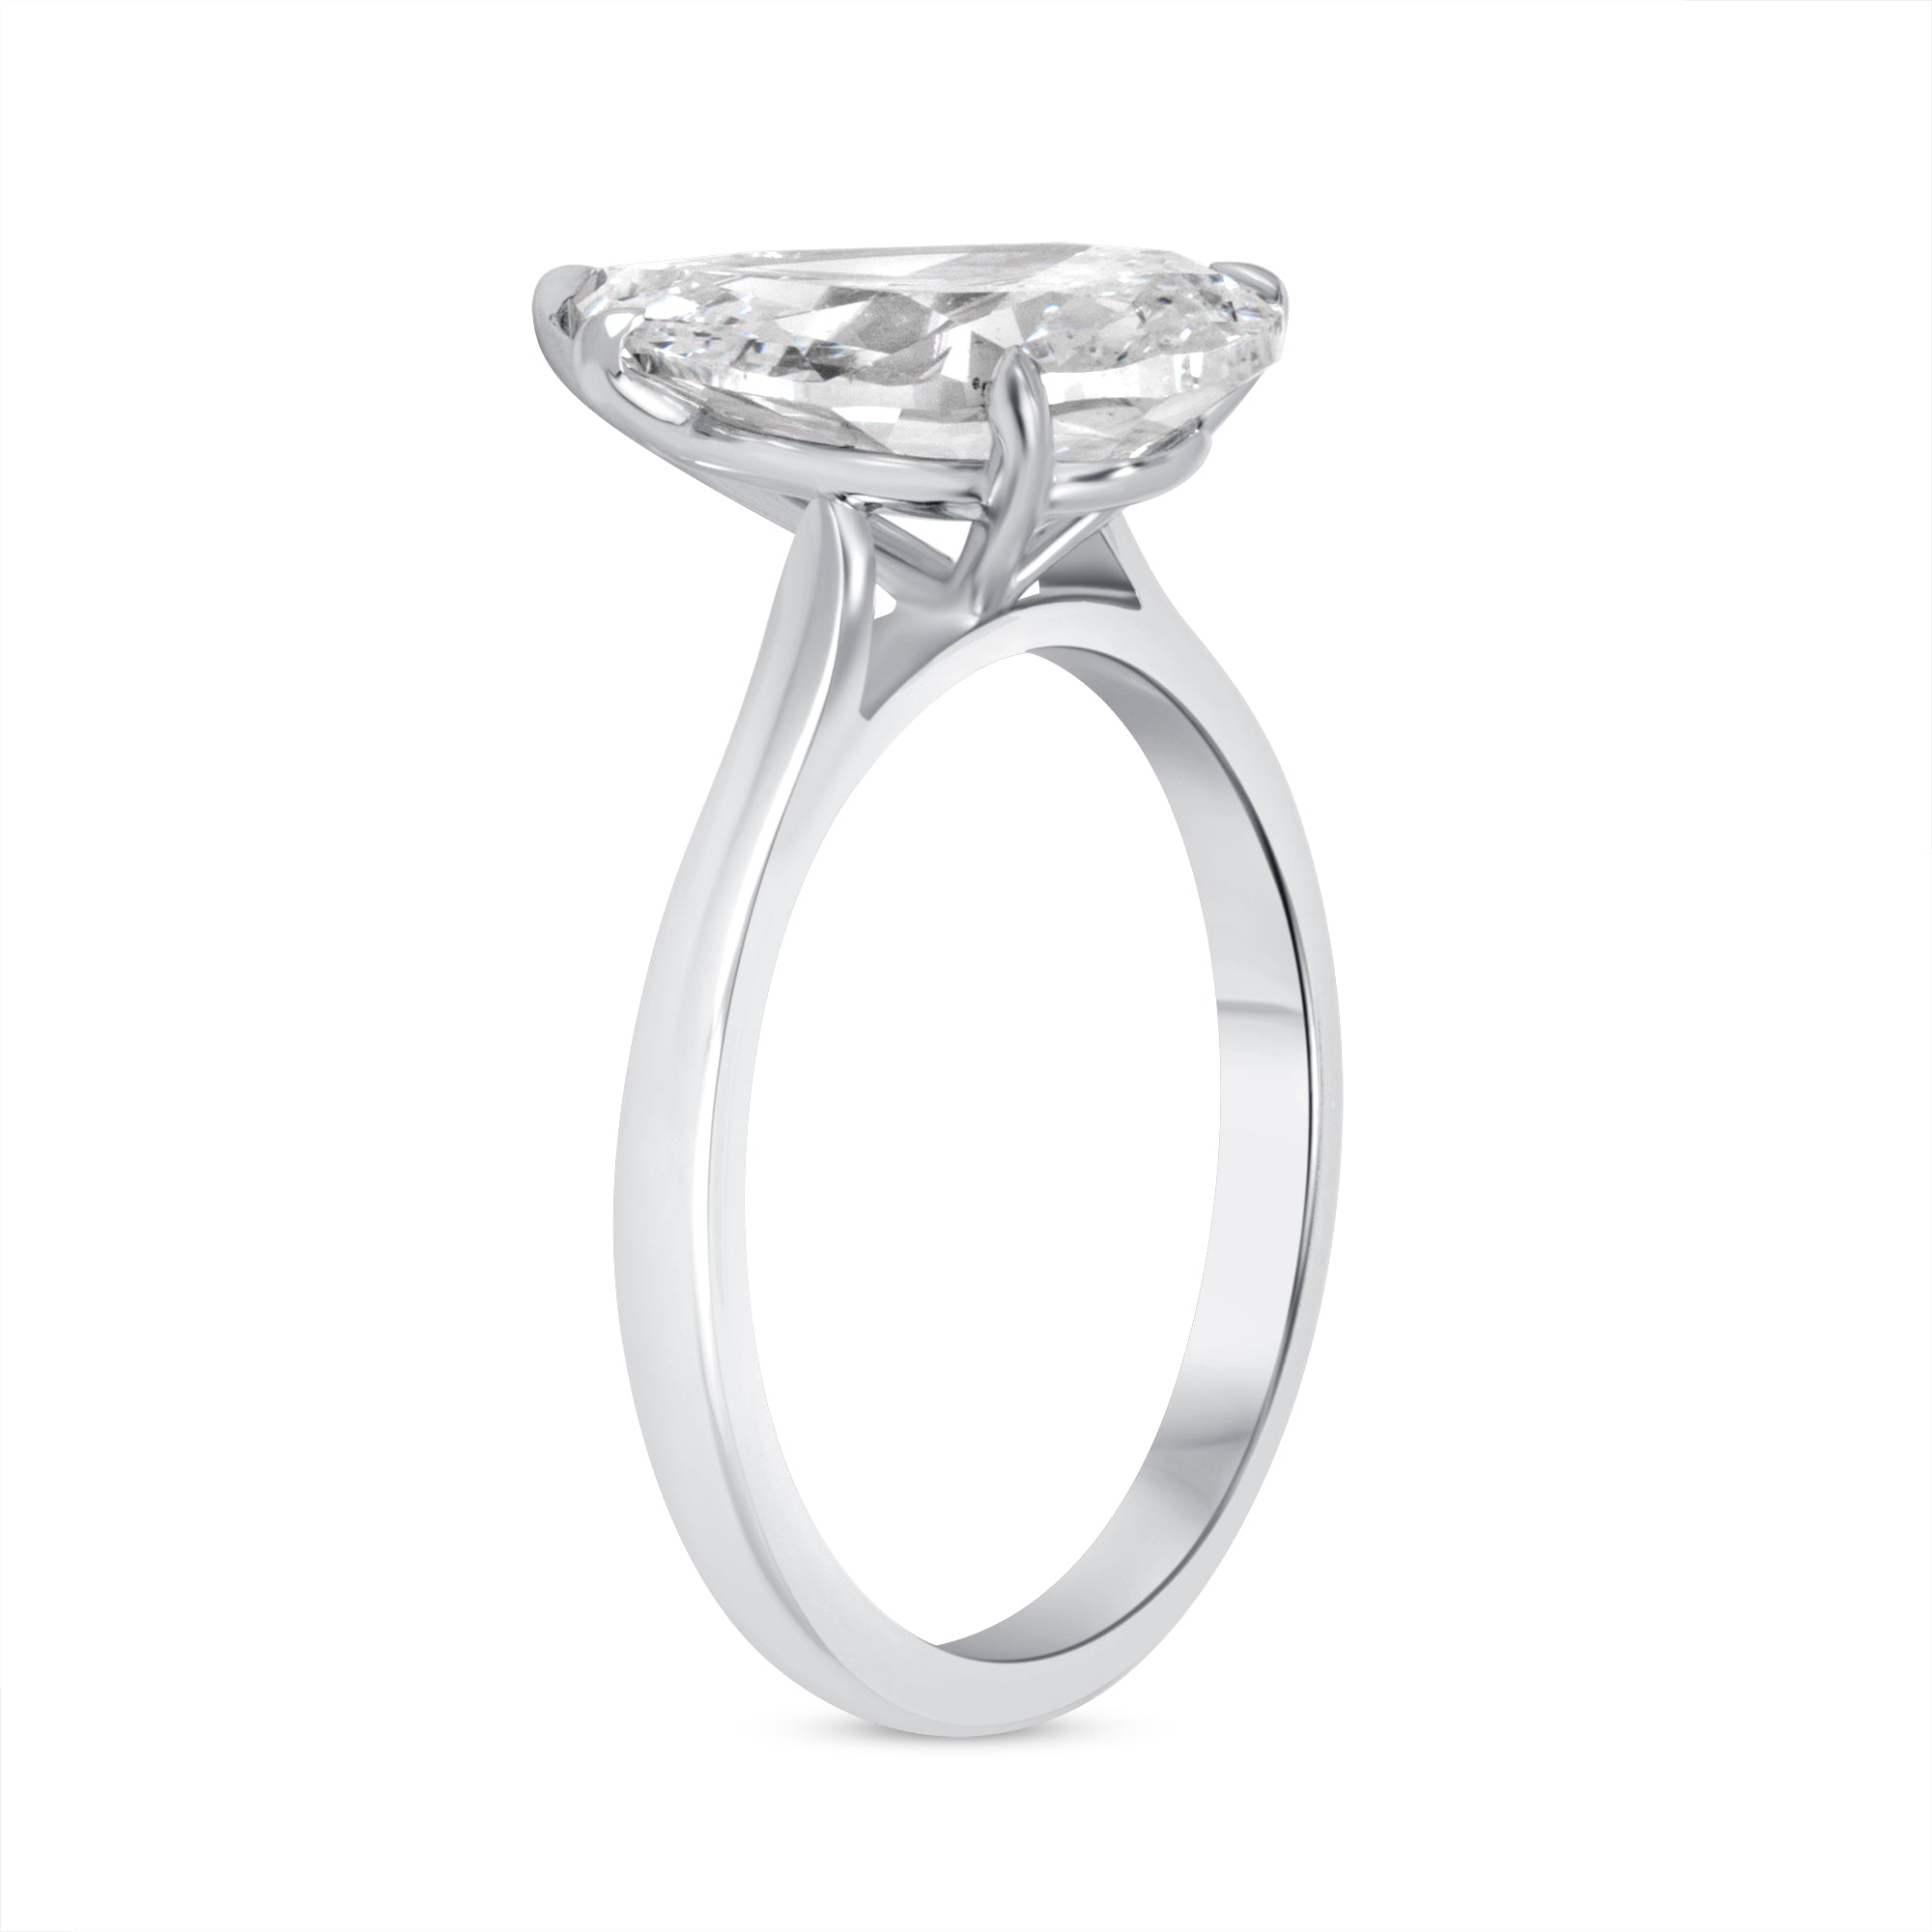 3.15ct Pear Cut Diamond Solitaire Ring in Platinum Band, GIA Certified